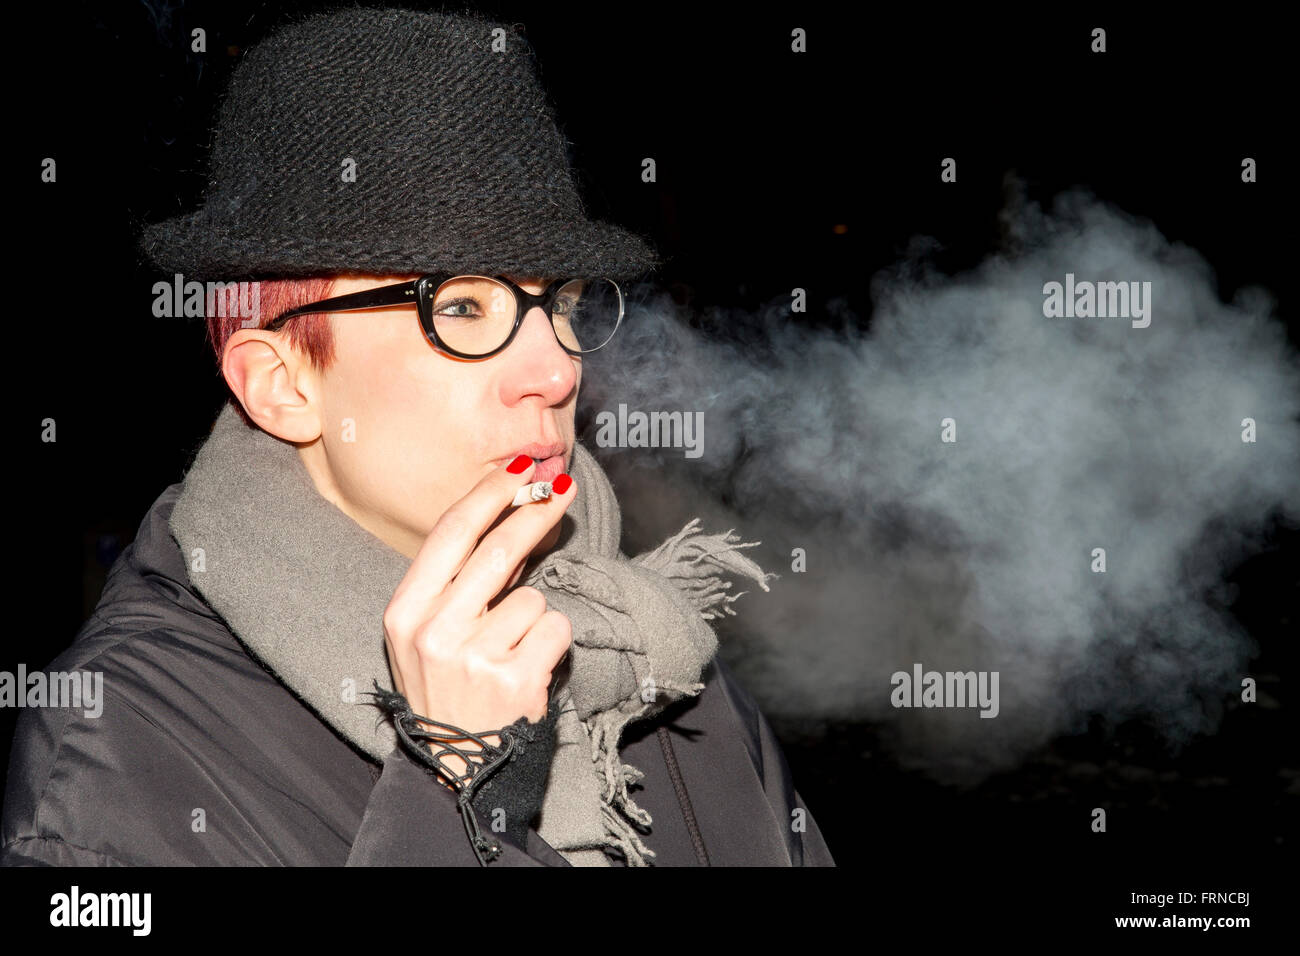 red-haired woman with hat and glasses standing outside and smoking a cigarette Stock Photo